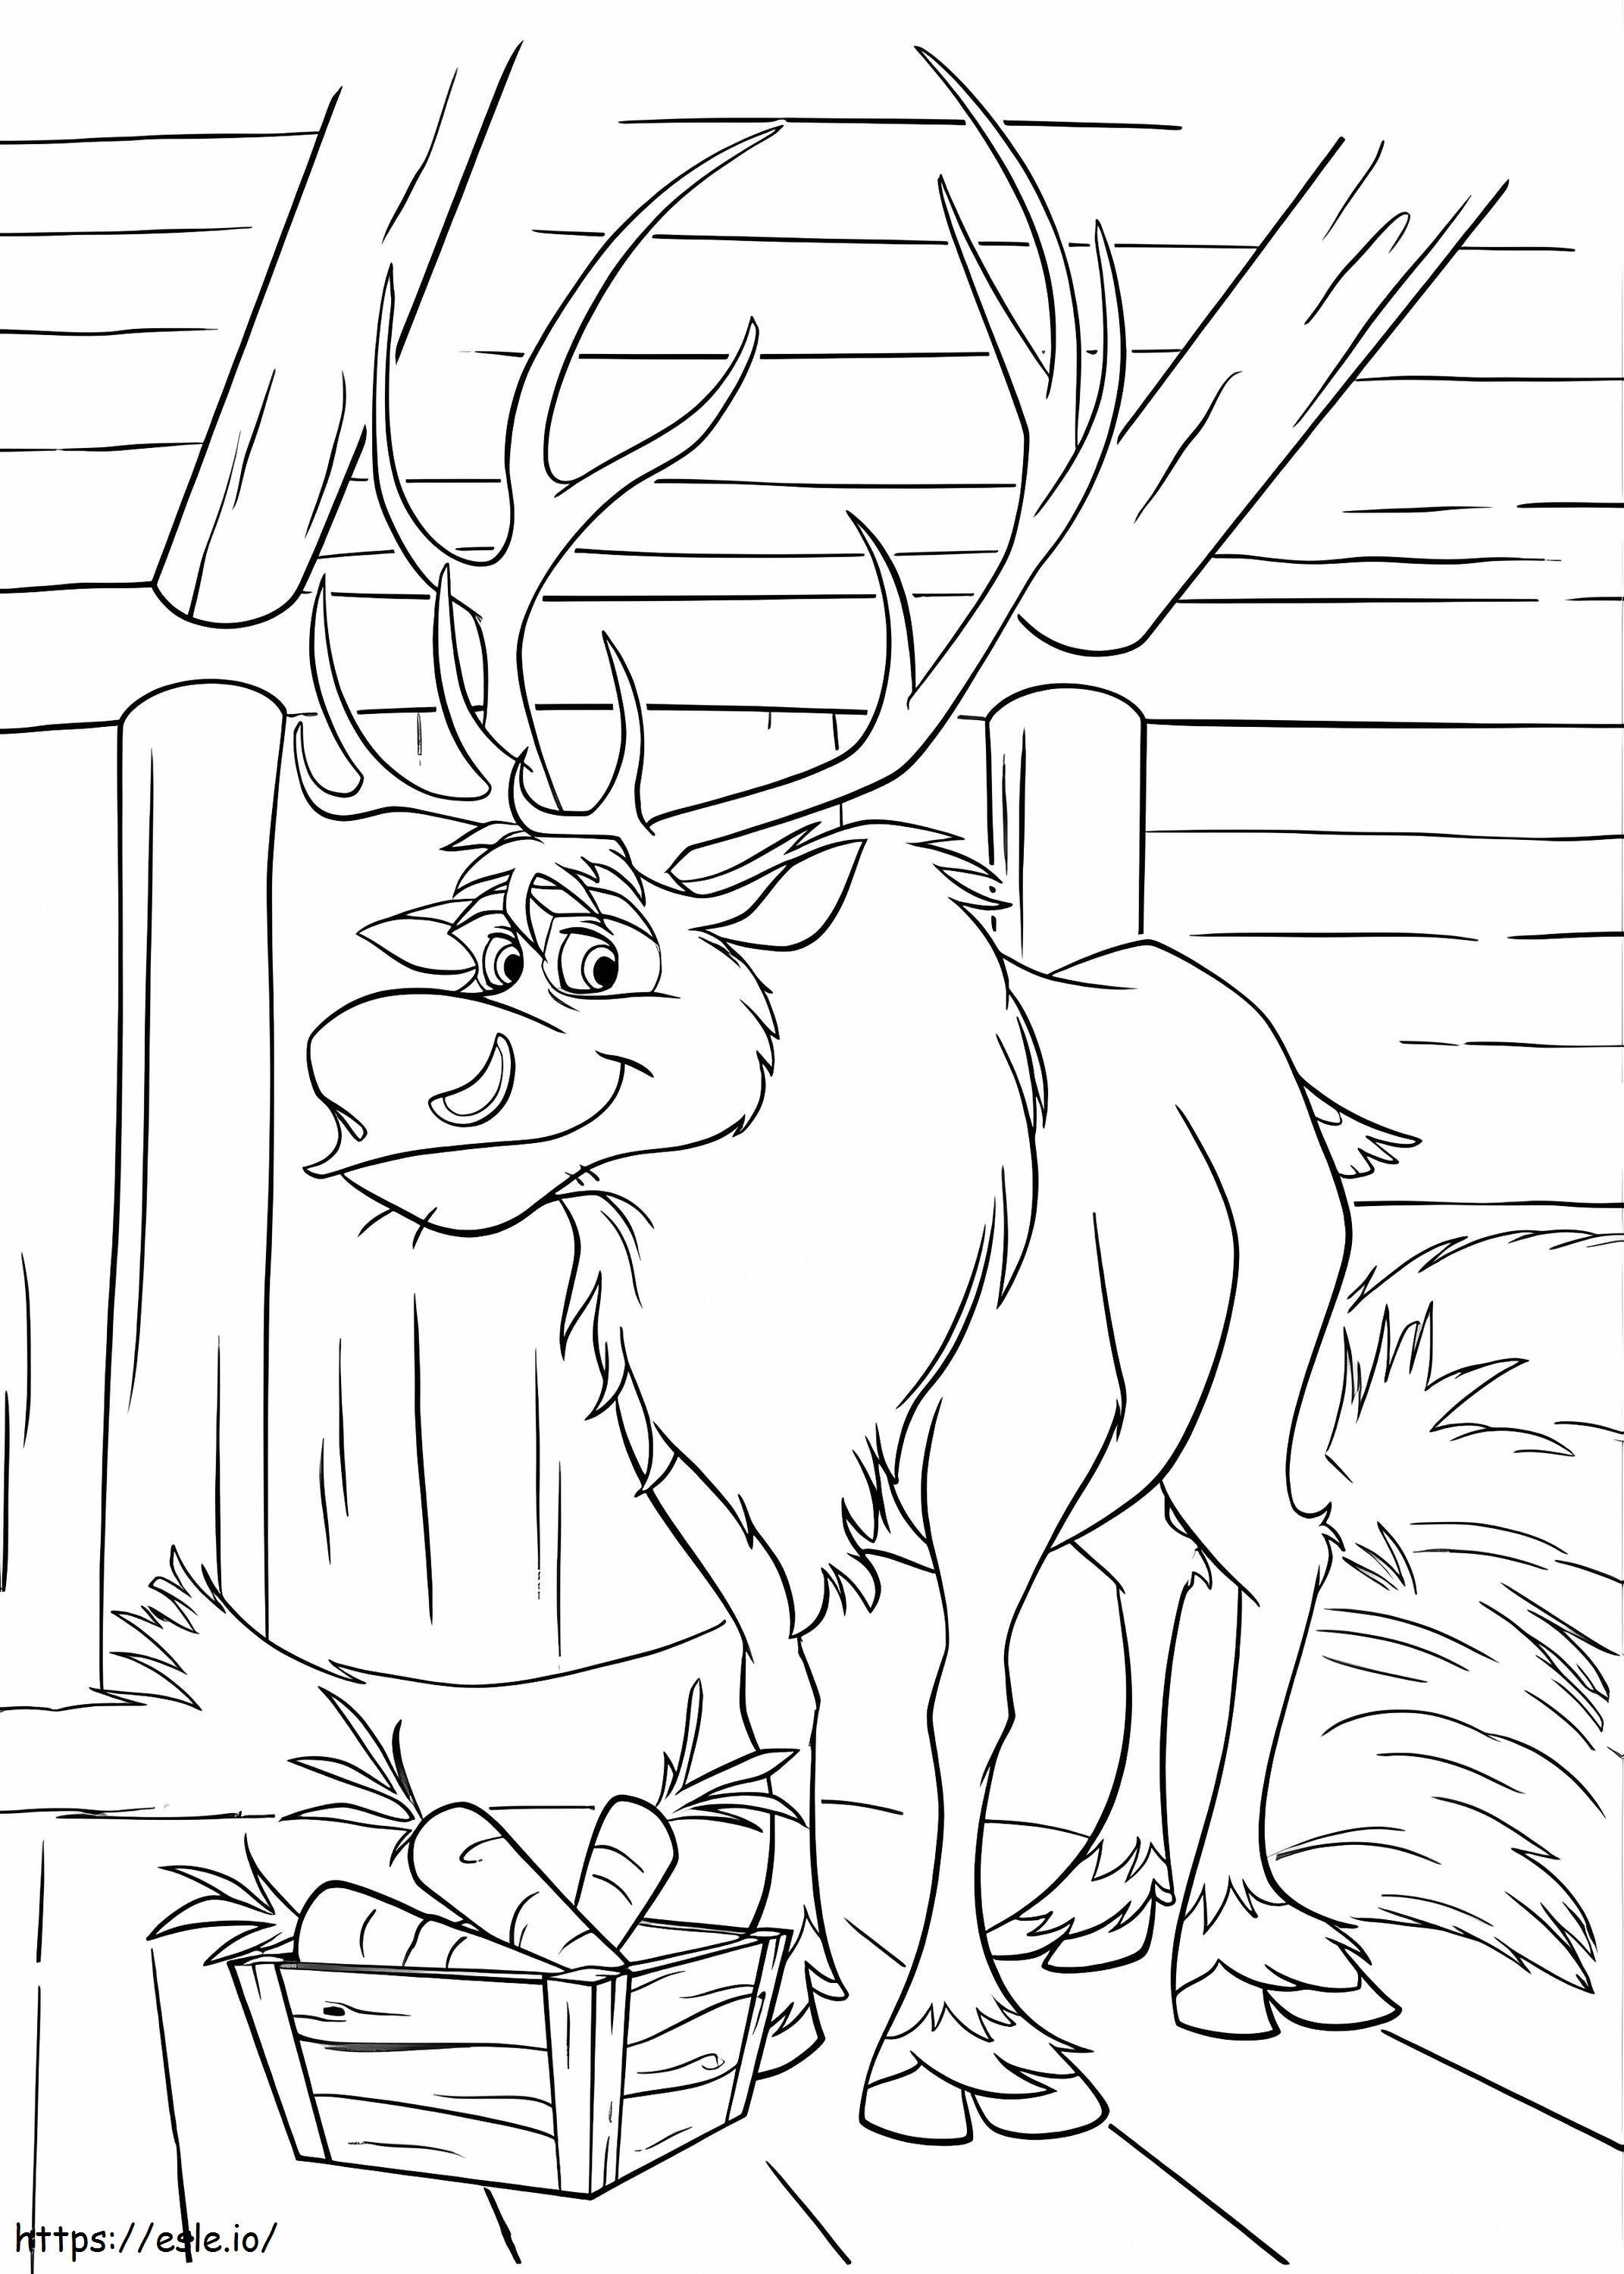 Sven 1 coloring page